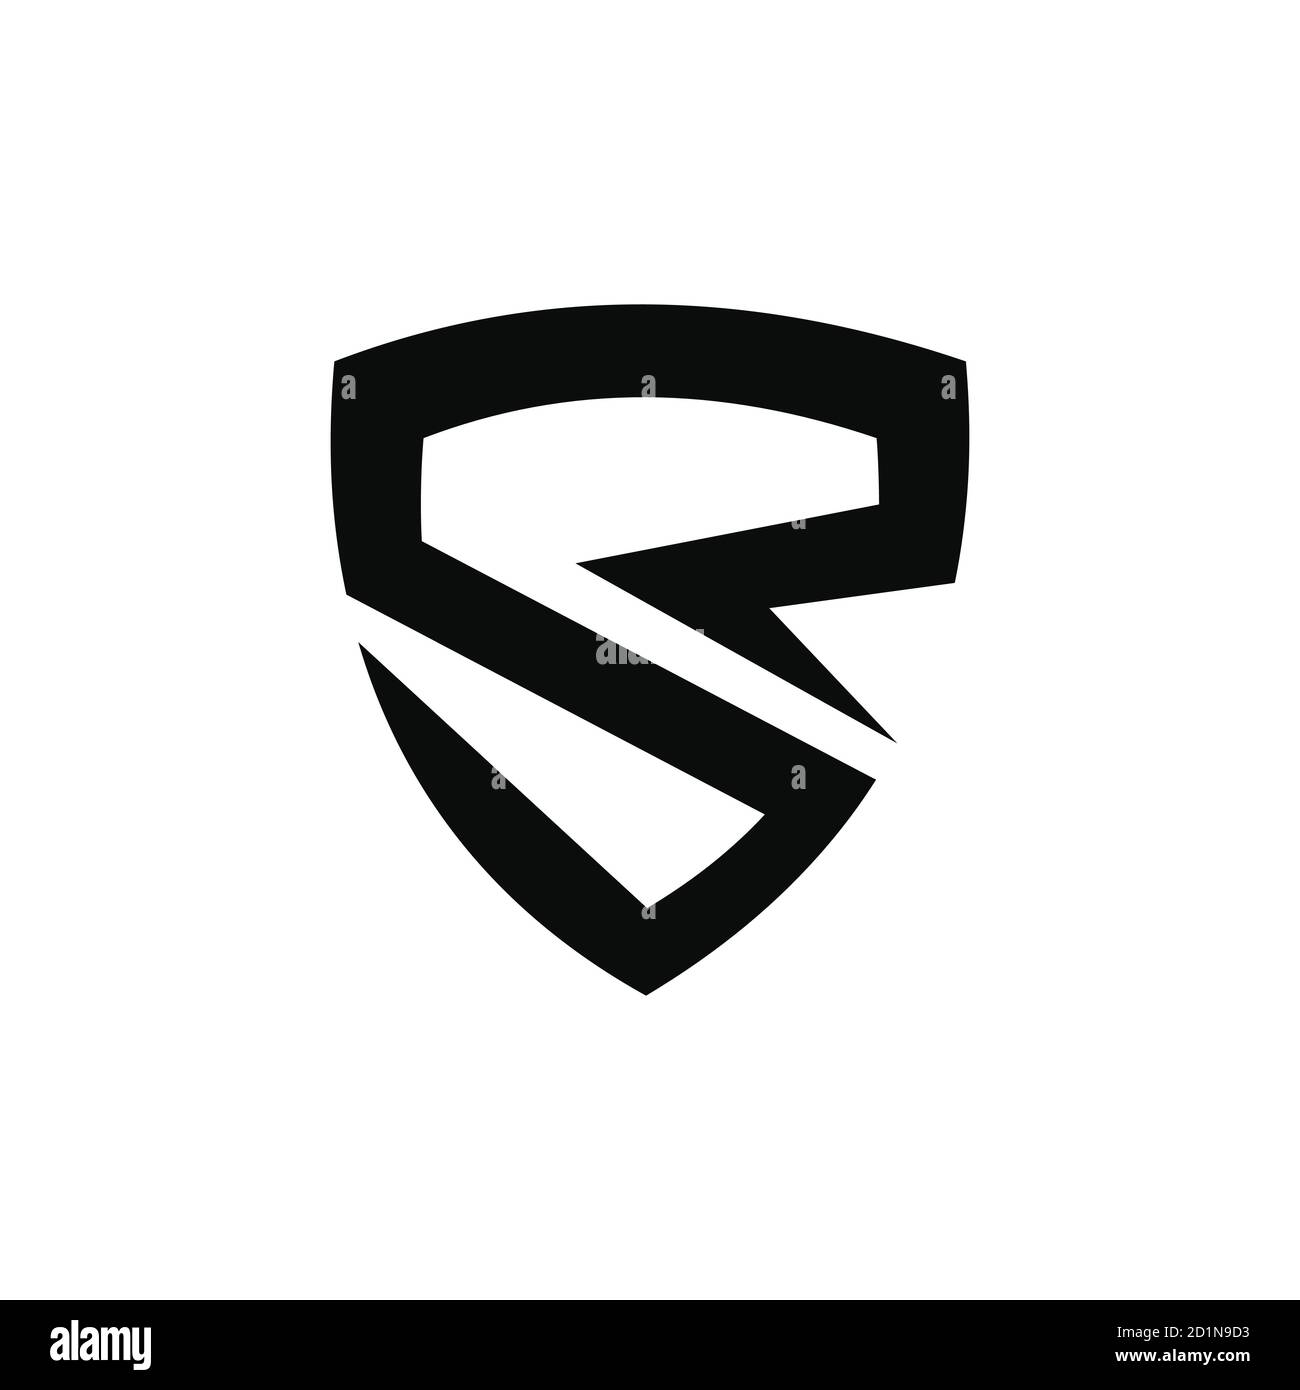 Rs Logo Vector Images (over 2,900)